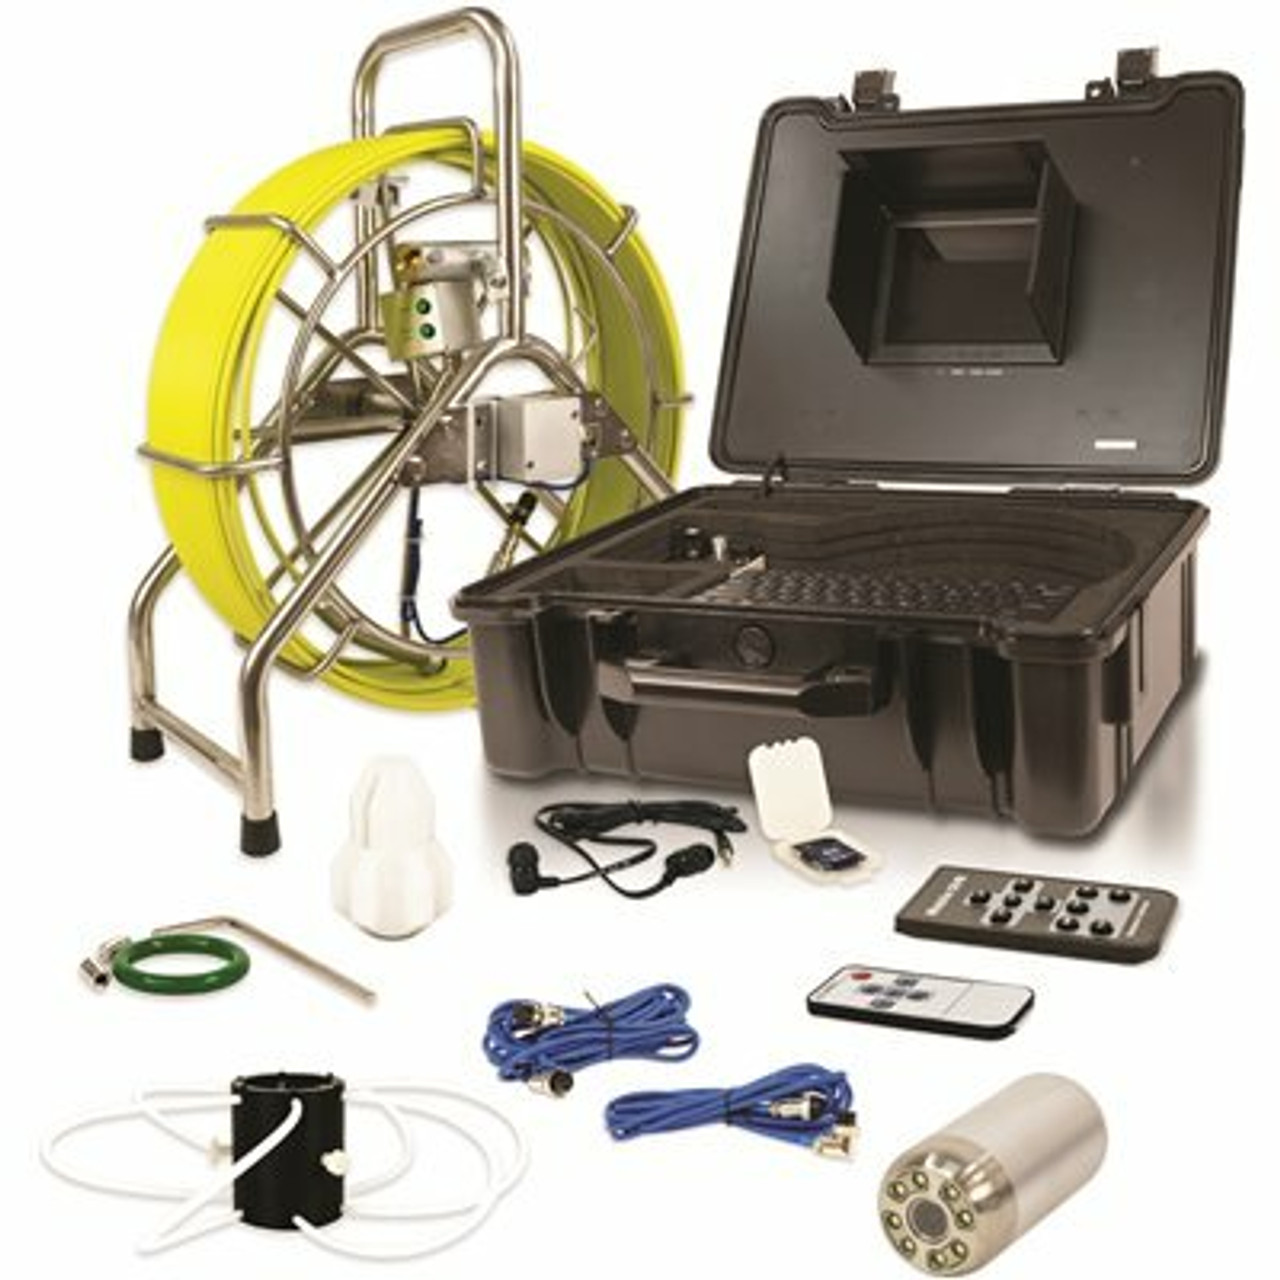 196 Ft. Pipe Inspection System With Color Camera And Location Transmitter